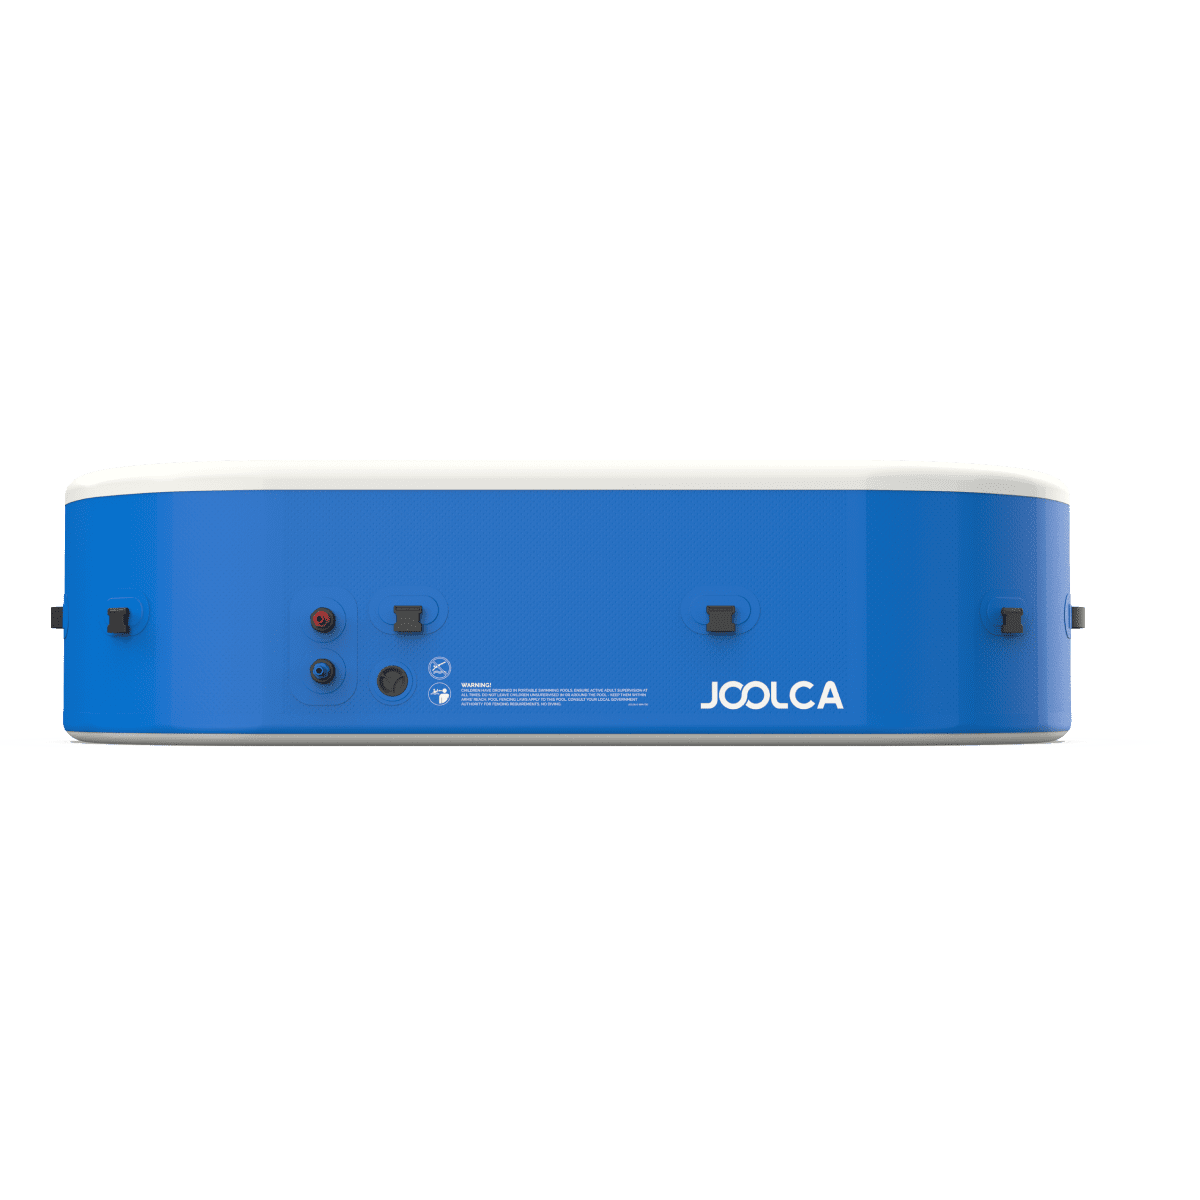 A side view of an inflatable hot tub with Joolca branding